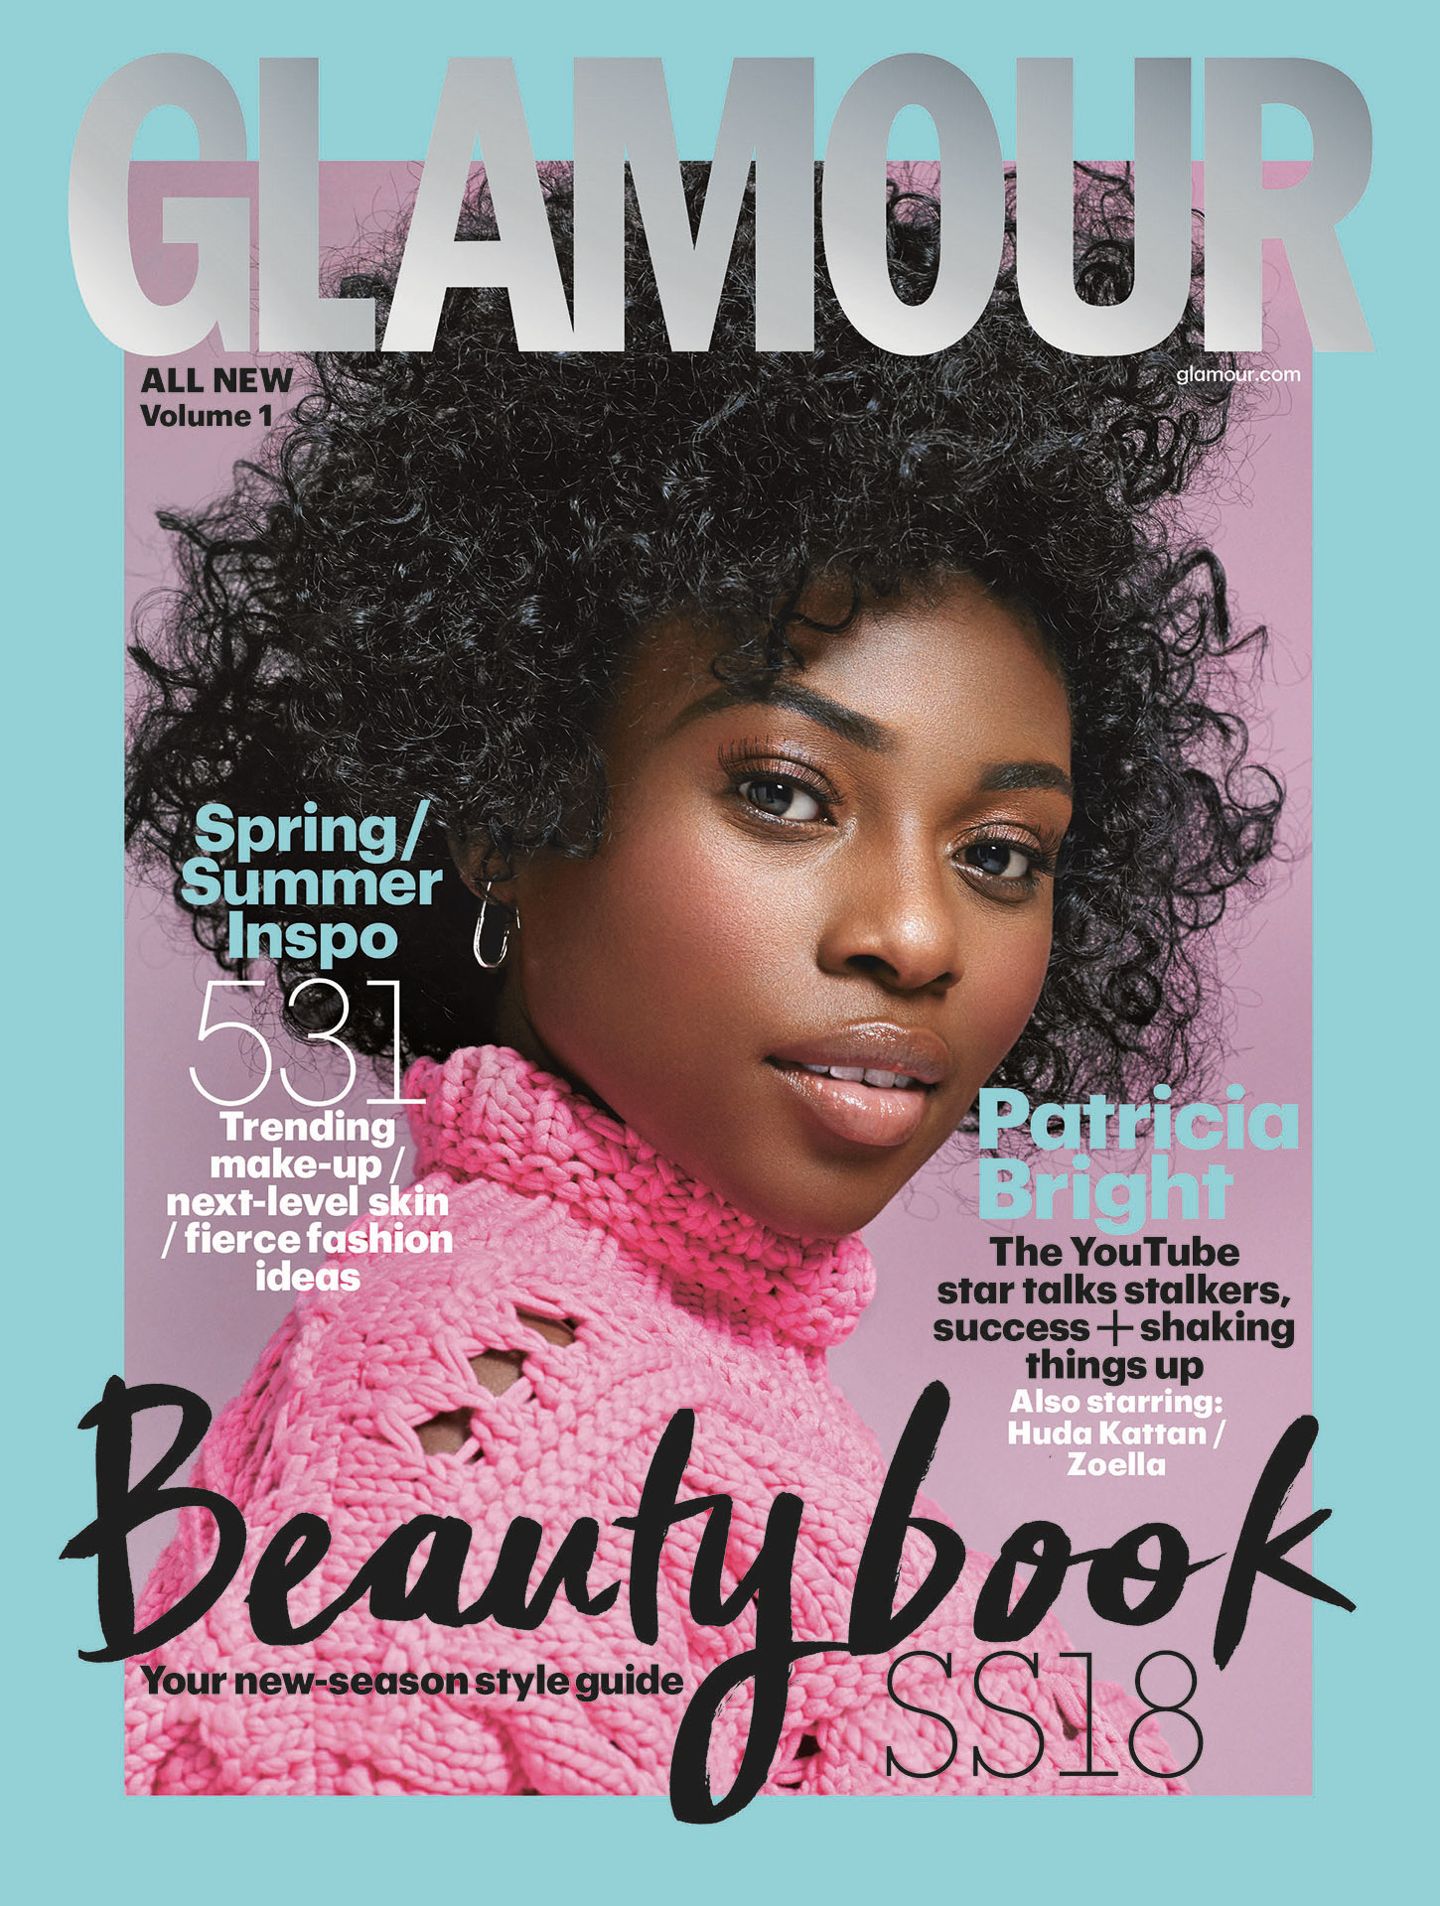 Glamours New Magazine Features Three YouTube Icons As Cover Stars